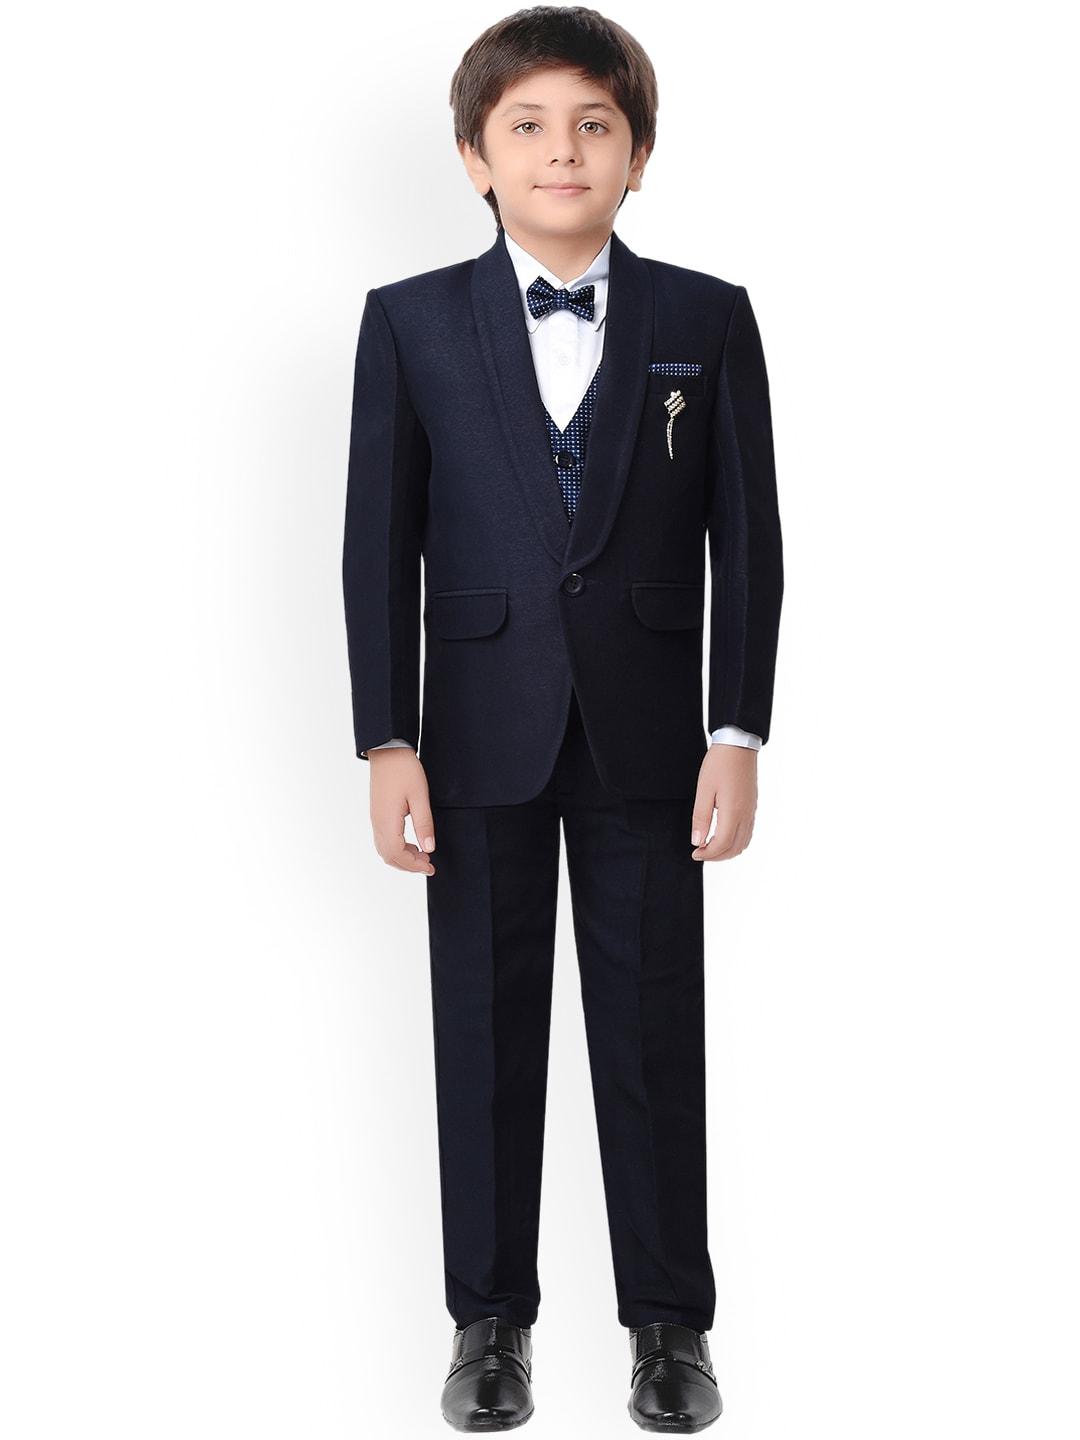 jeetethnics-boys-navy-blue-solid-coat-with-trousers